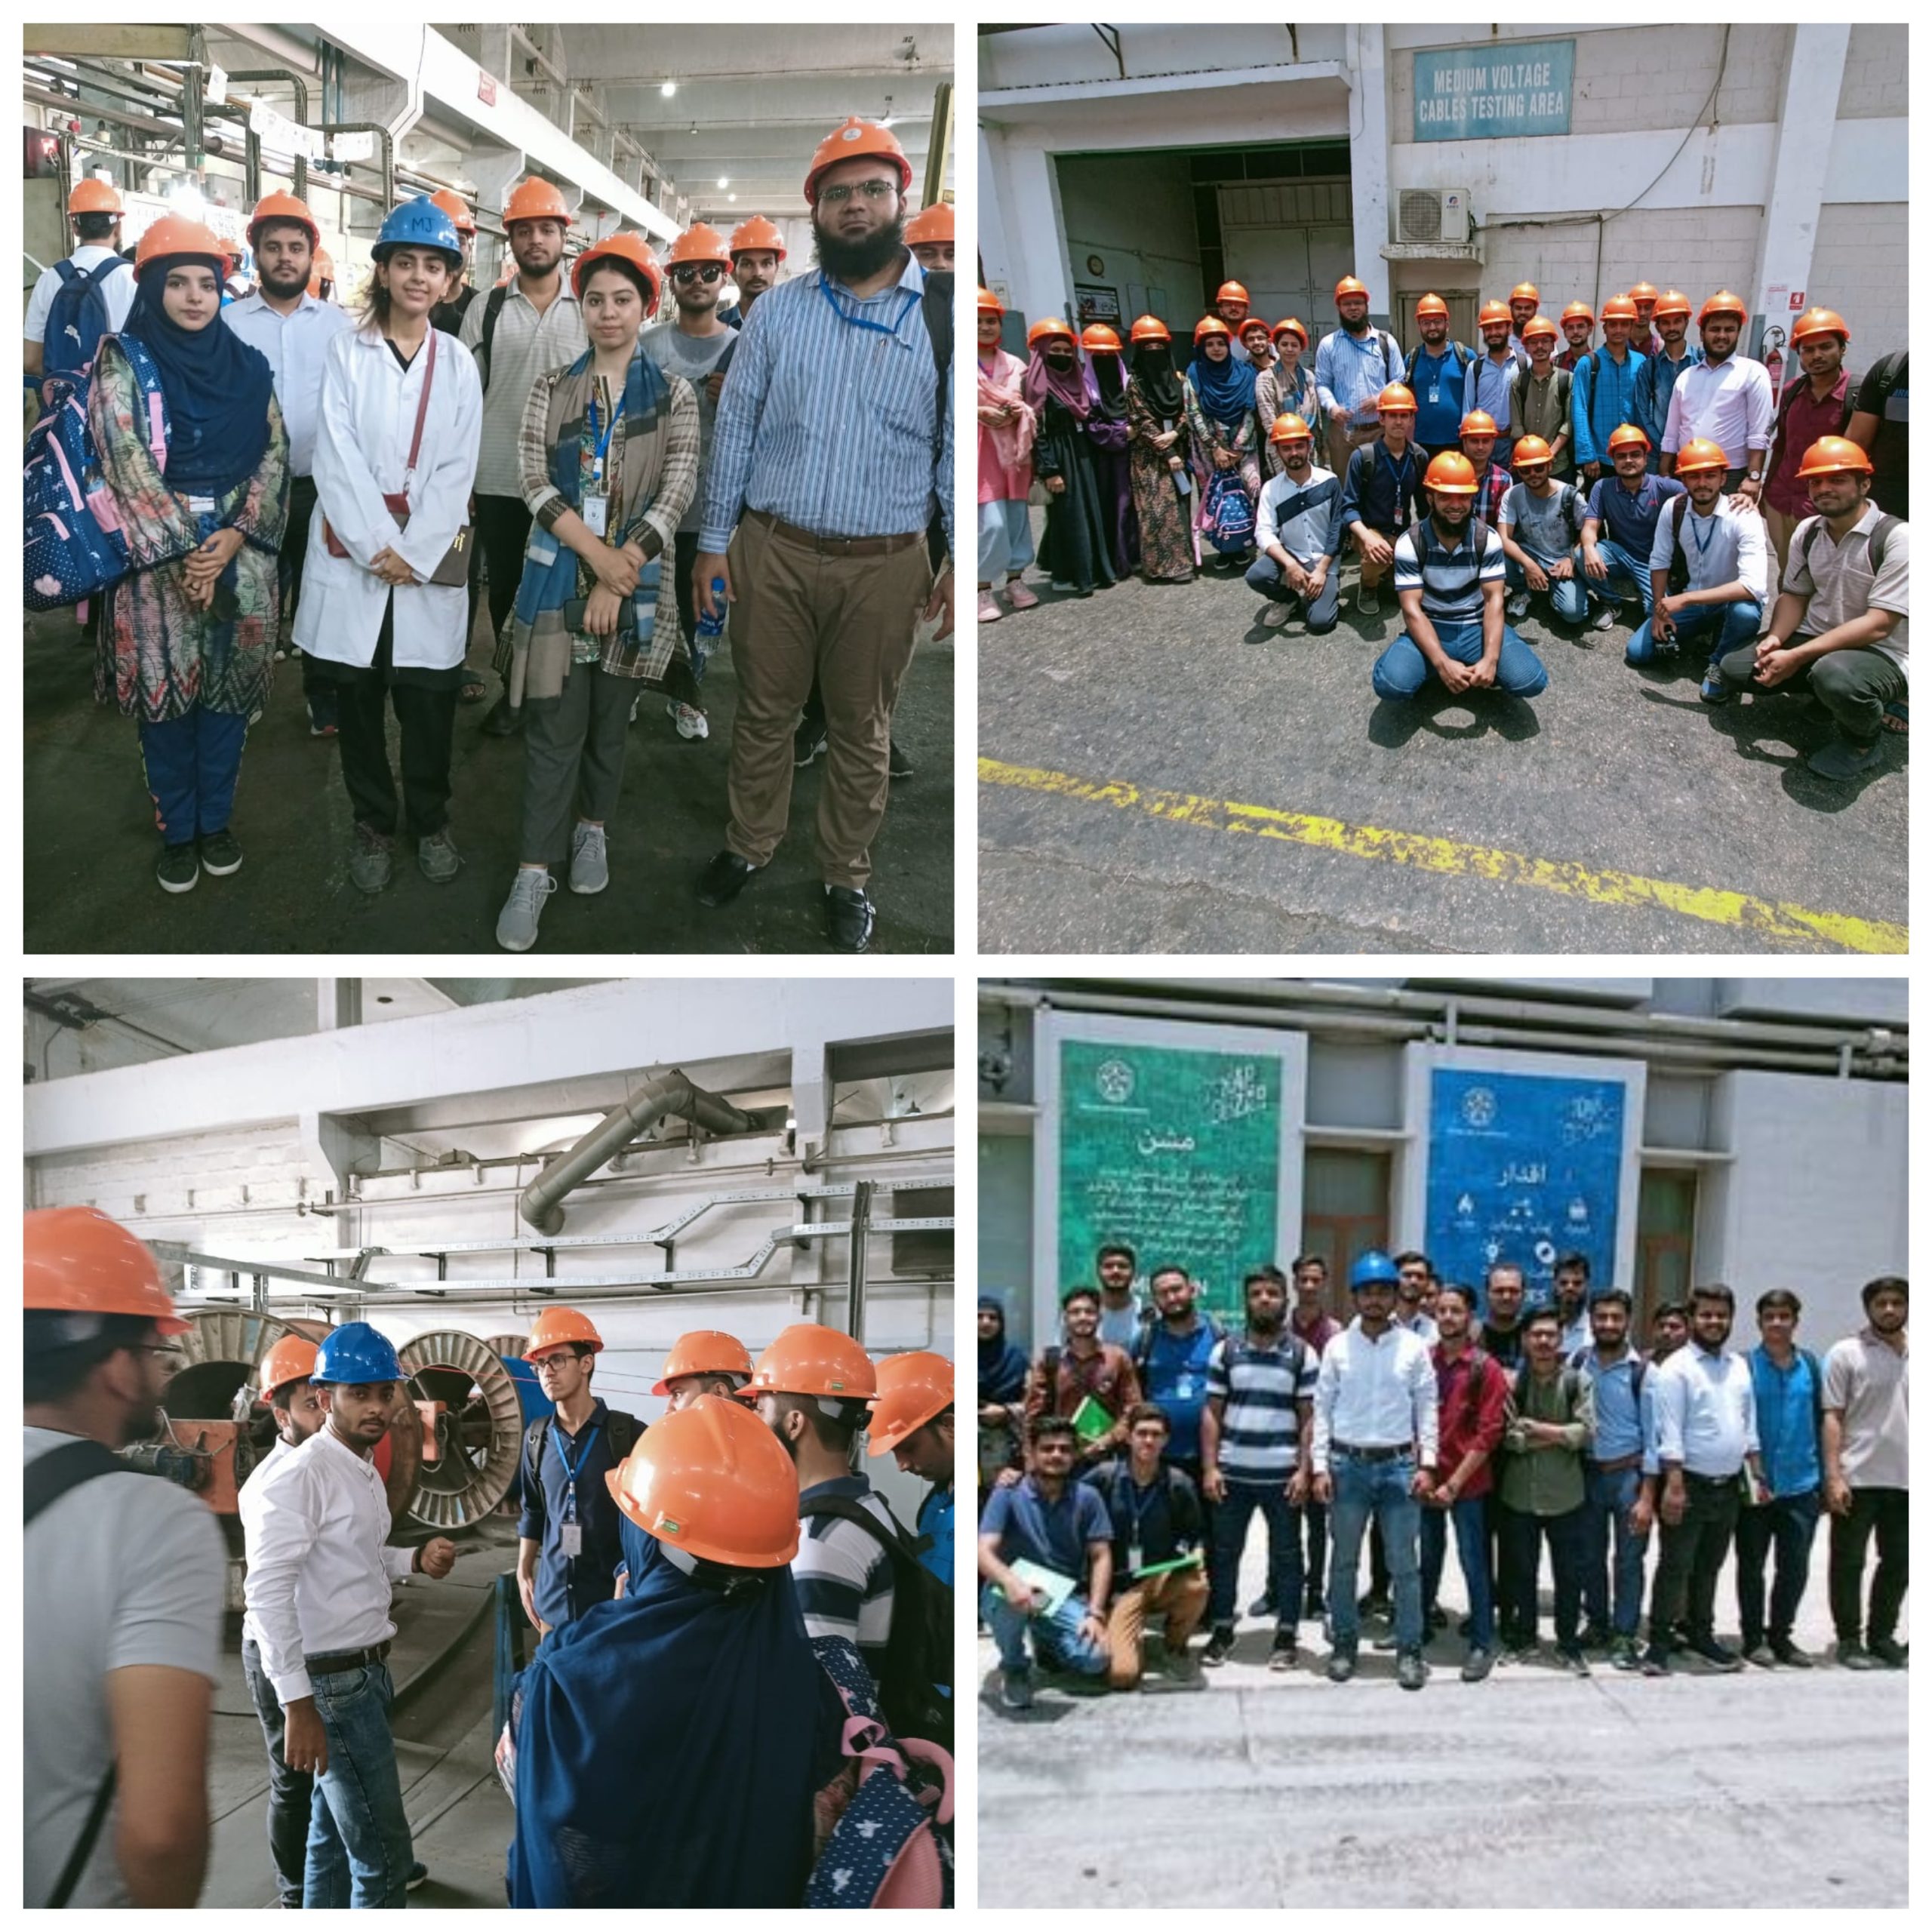 EE students from UIT University had an incredible opportunity to visit Pakistan Cables Limited